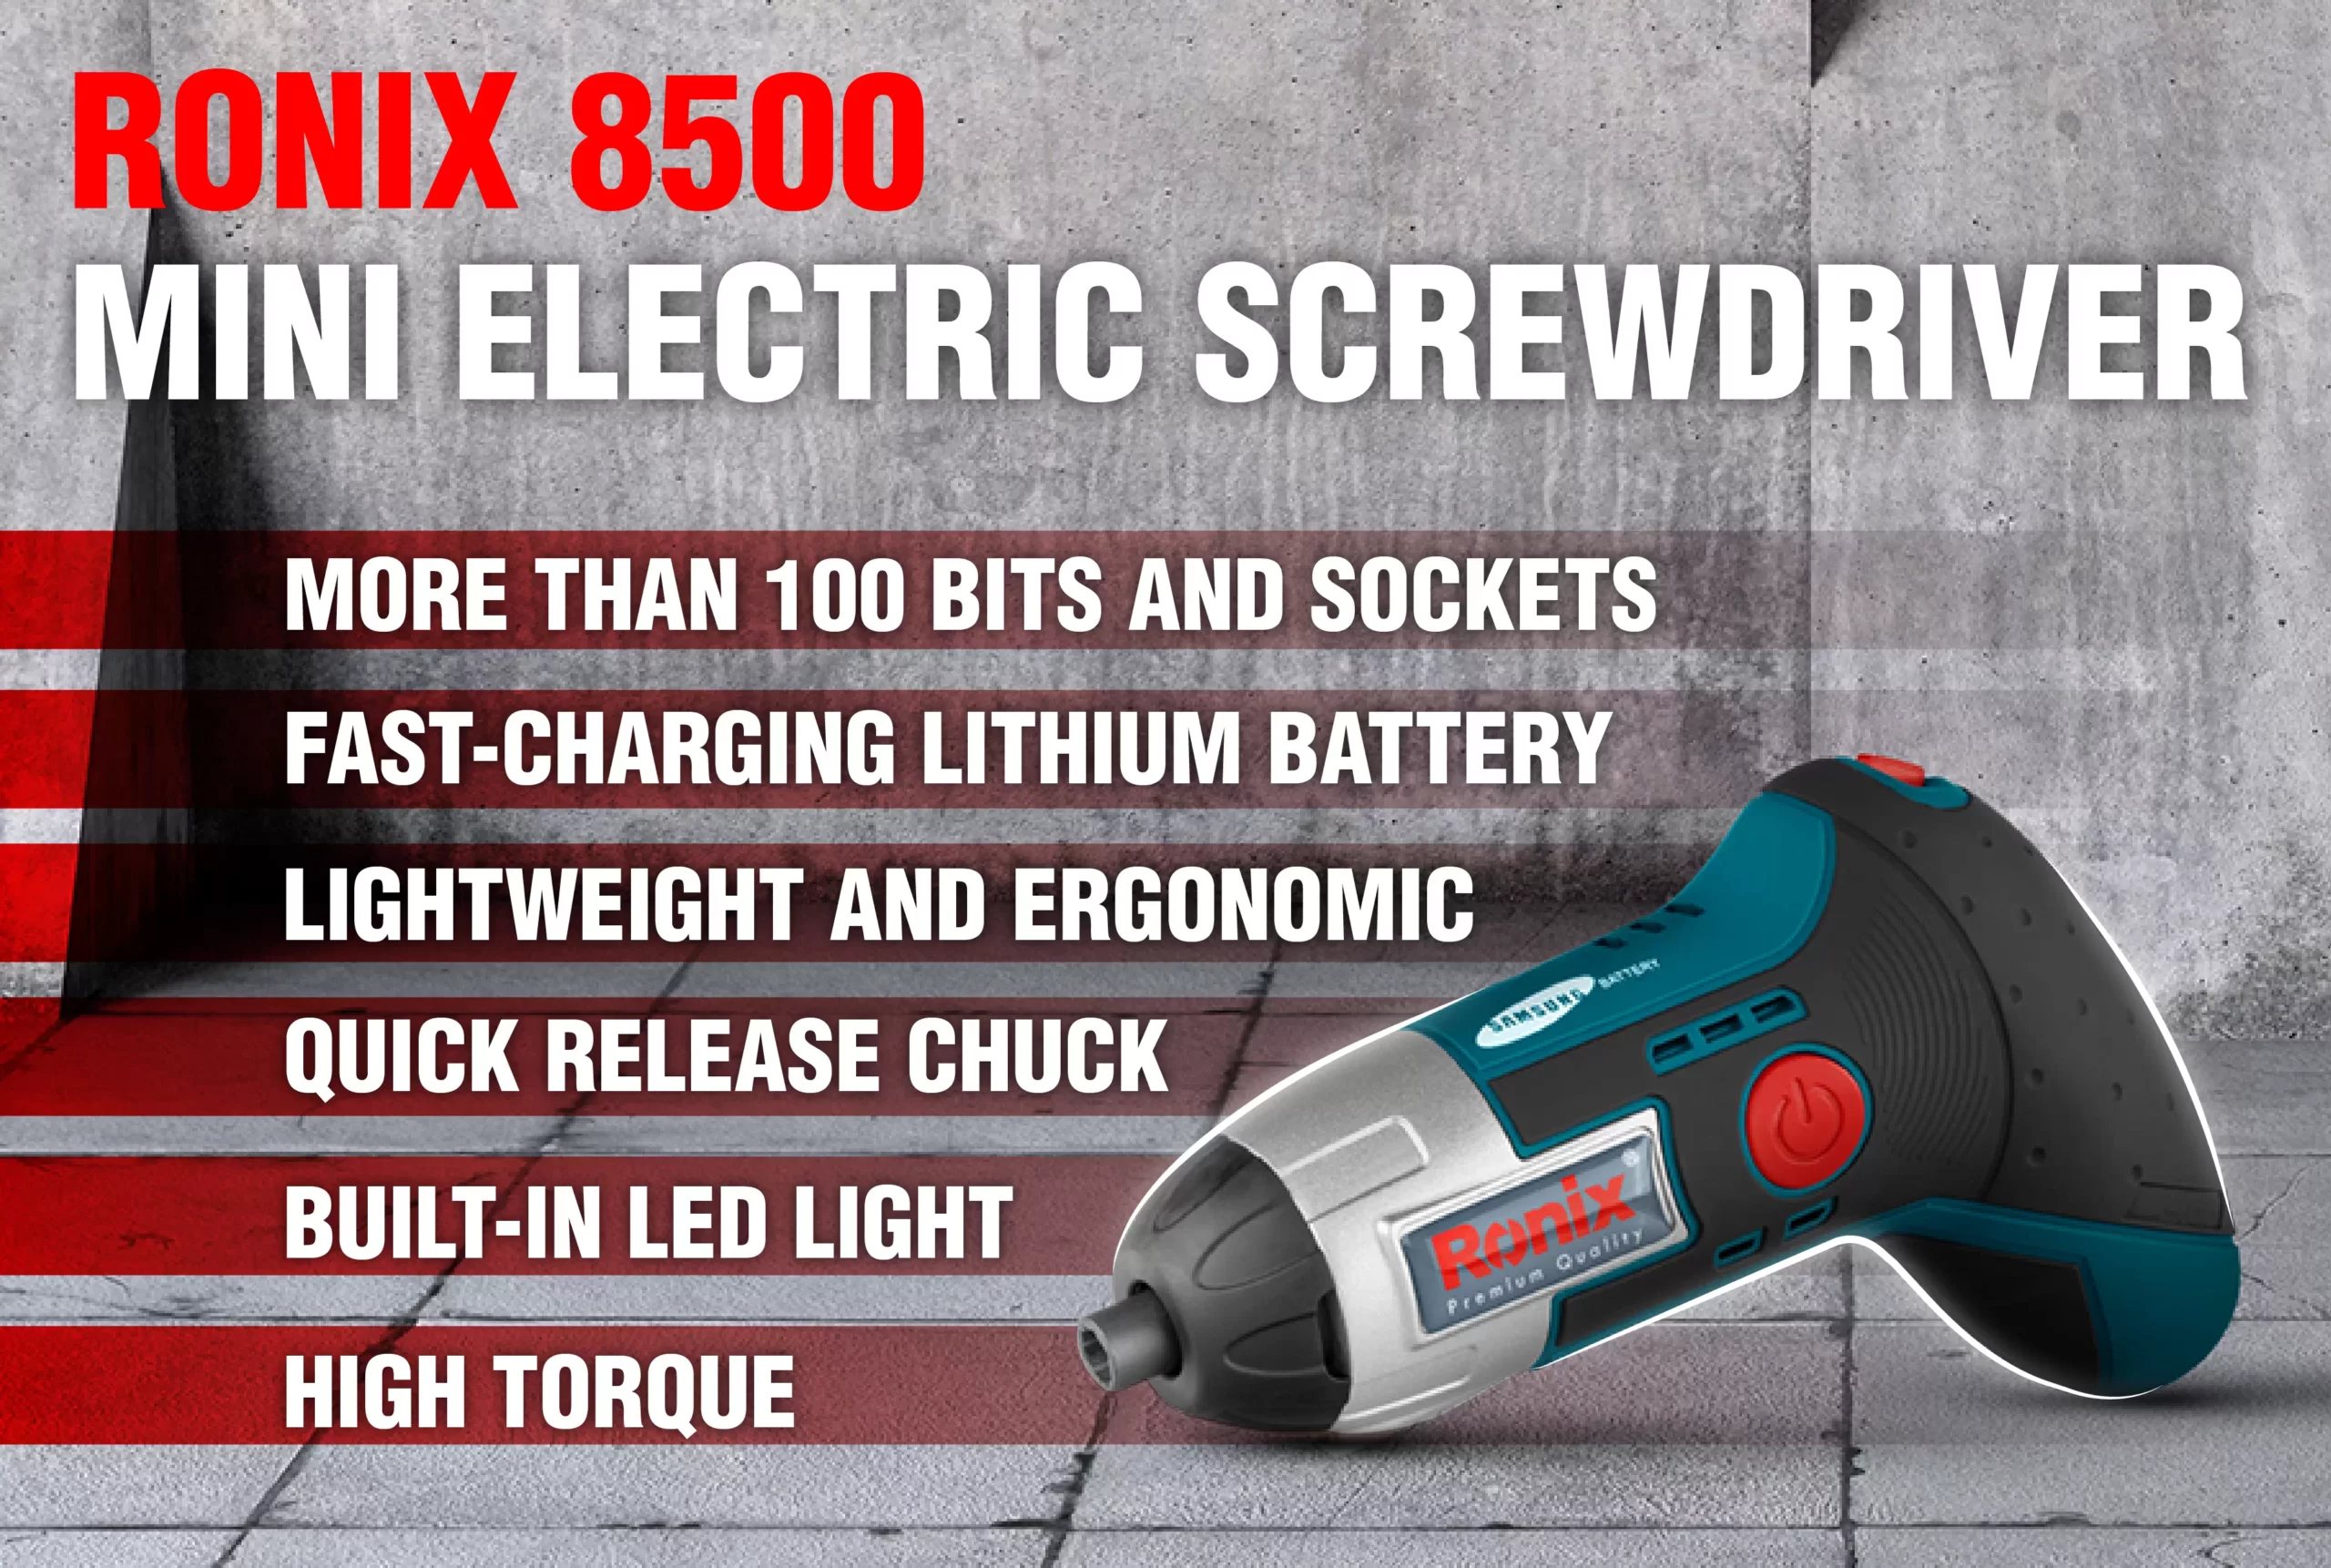 An infographic about Ronix 8500 mini electric screwdriver features